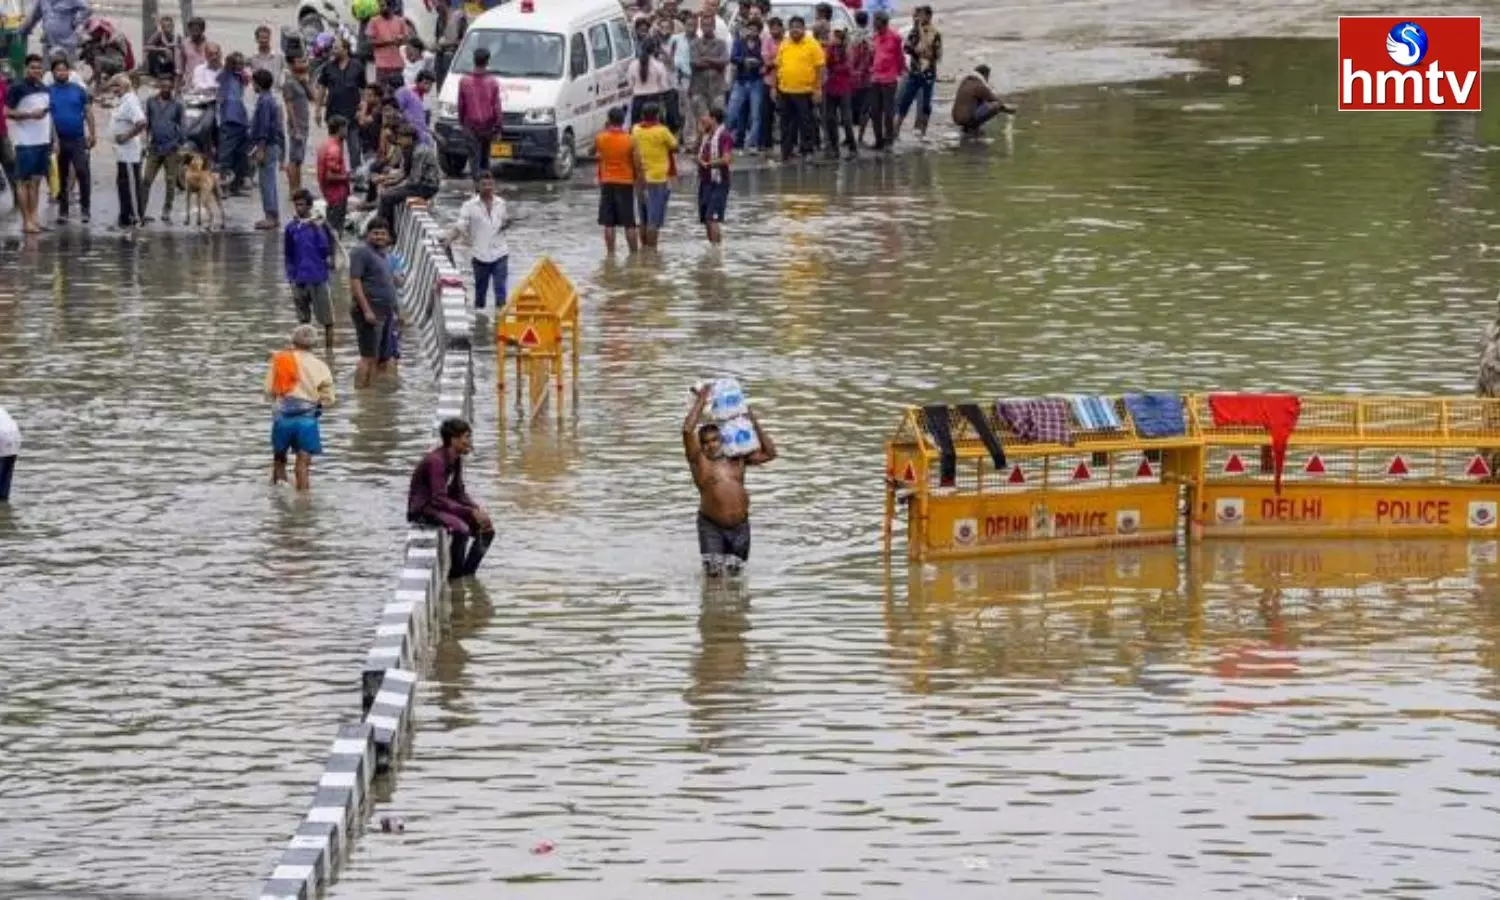 IMD Has Issued A Yellow Alert For Heavy Rain Forecast For Delhi